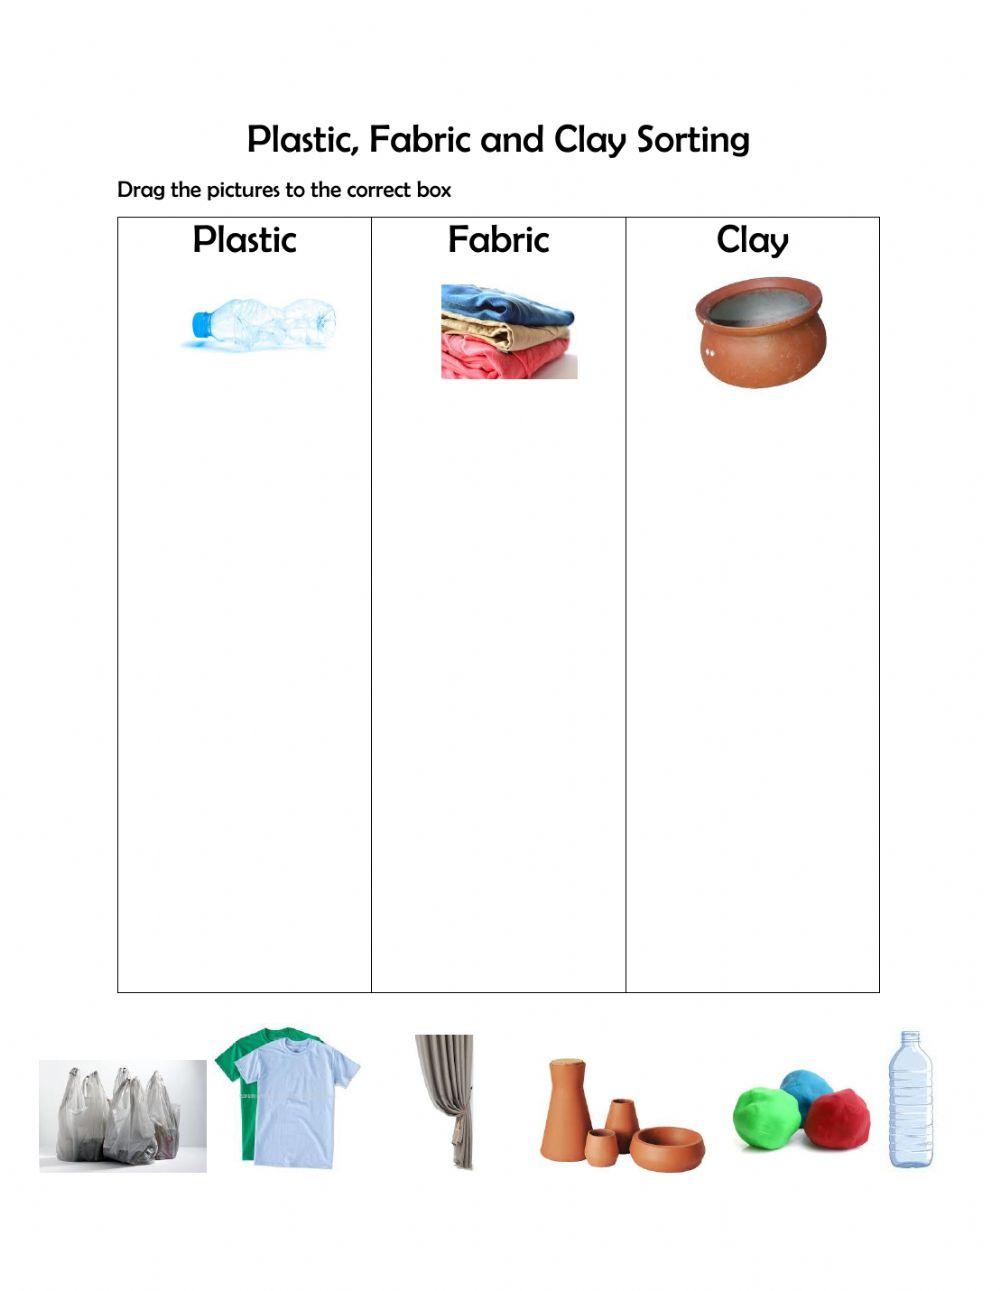 Sorting plastic, fabric and clay